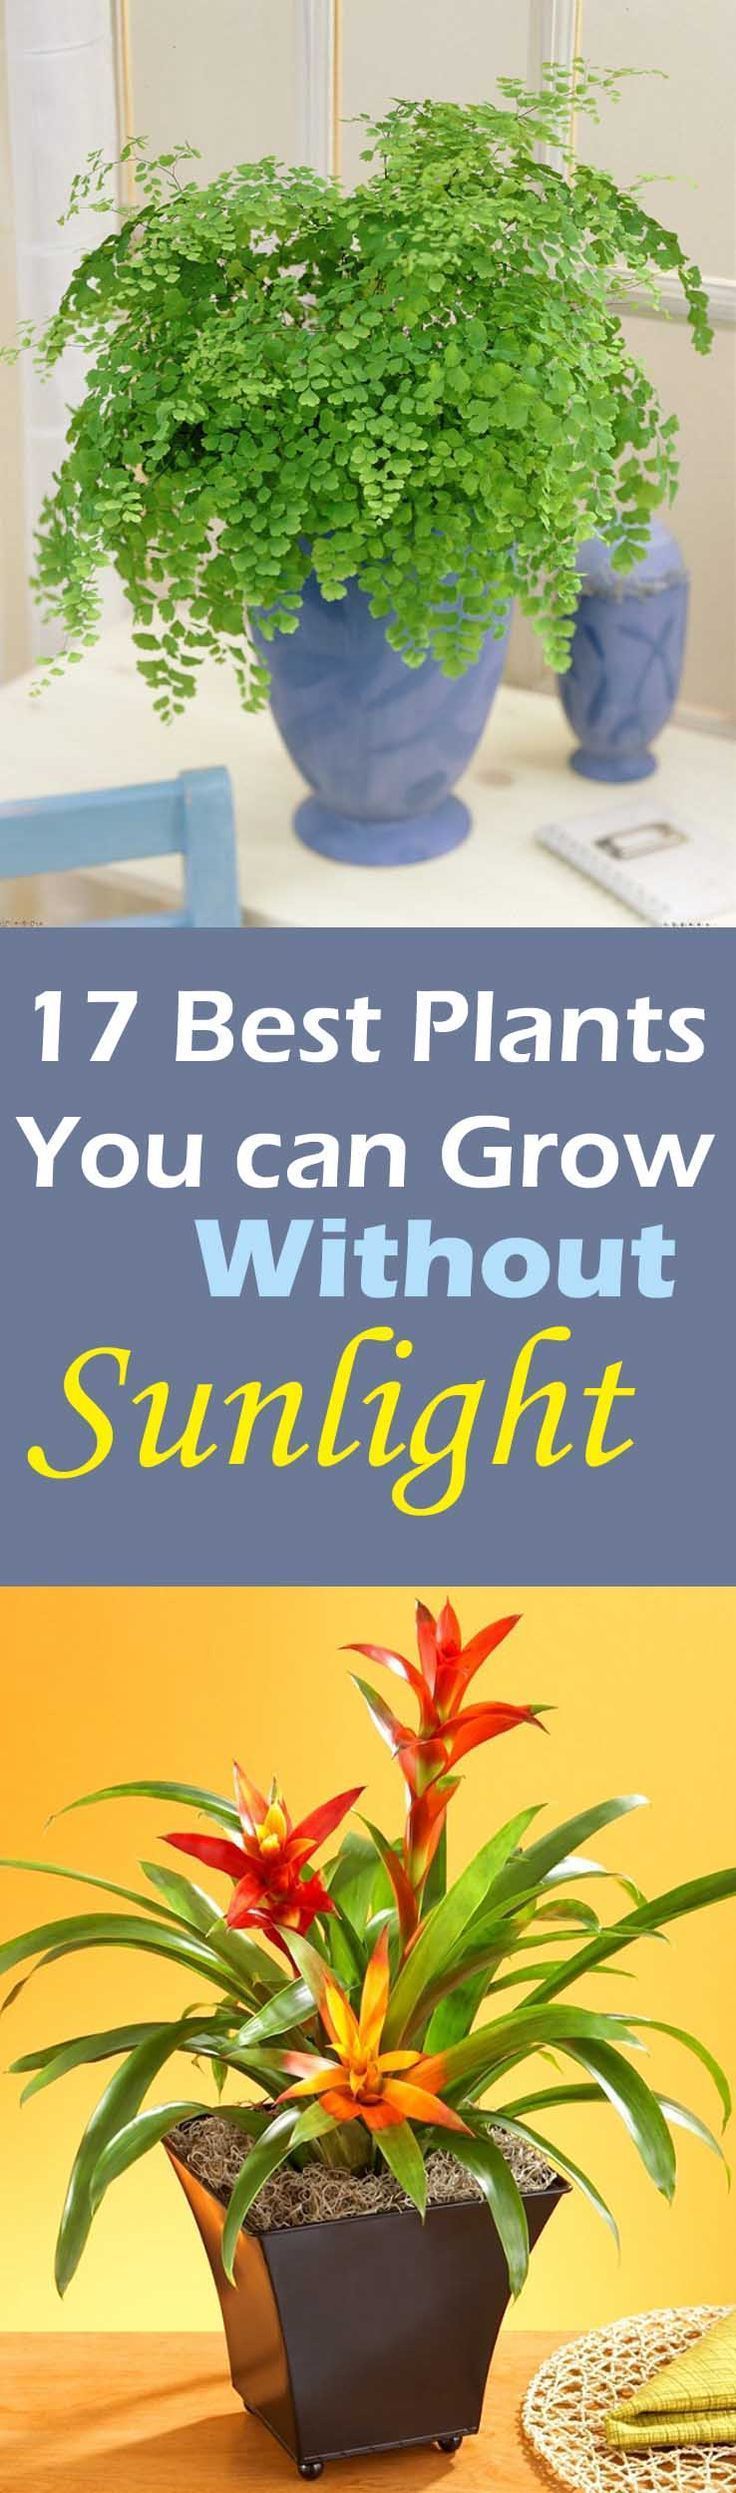 When you are looking for such plants choose that are known for their ability to grow in indirect sunlight. They are ideal